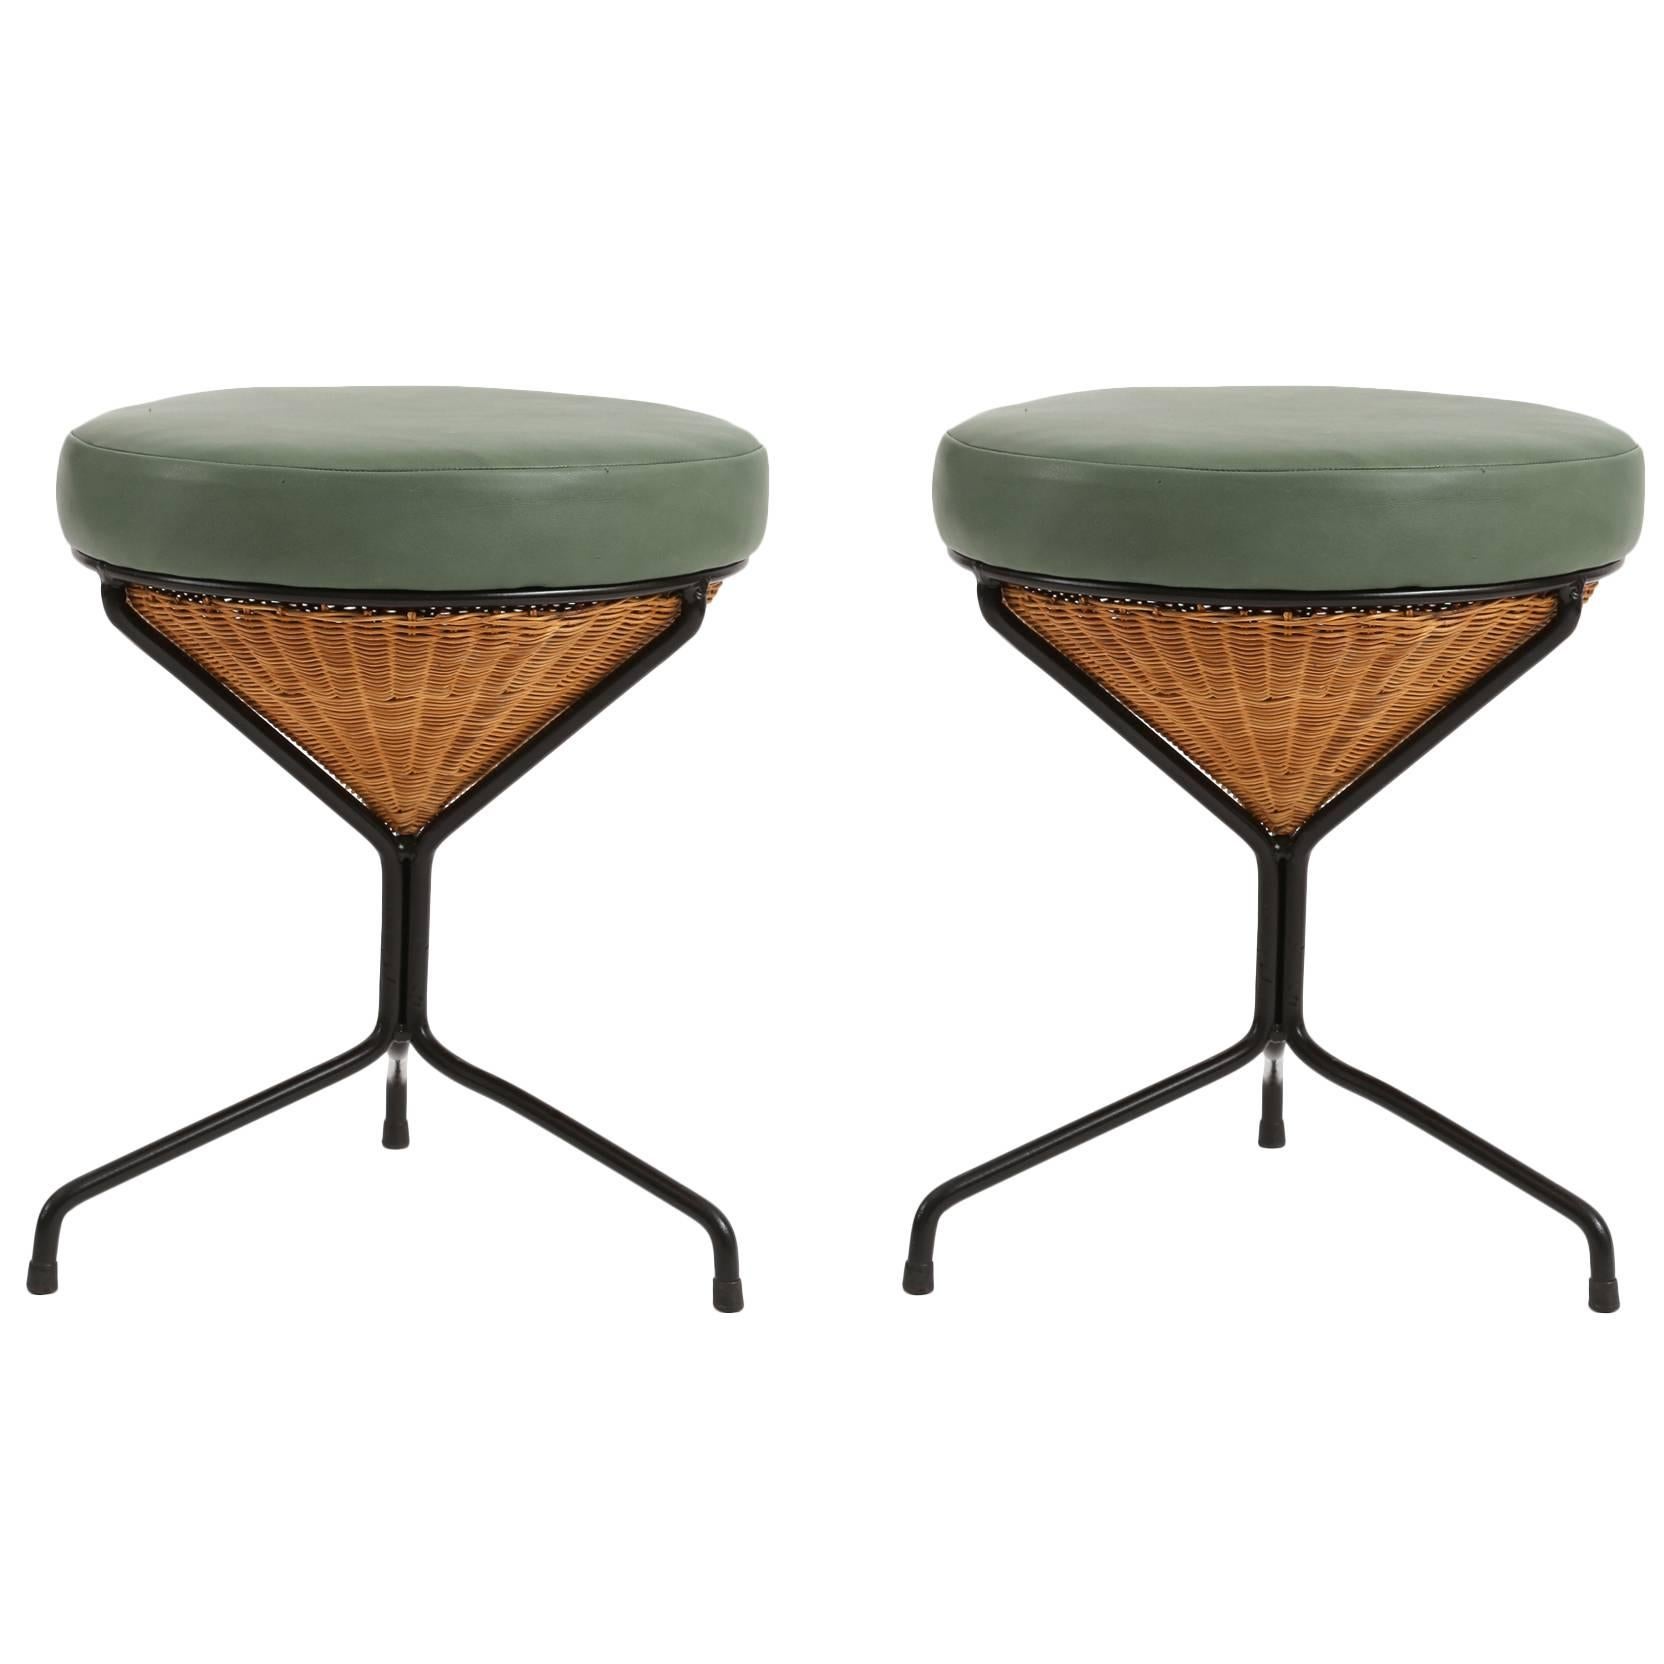 Danny Ho Fong for Tropi-Cal Wicker Iron and Leather Stools